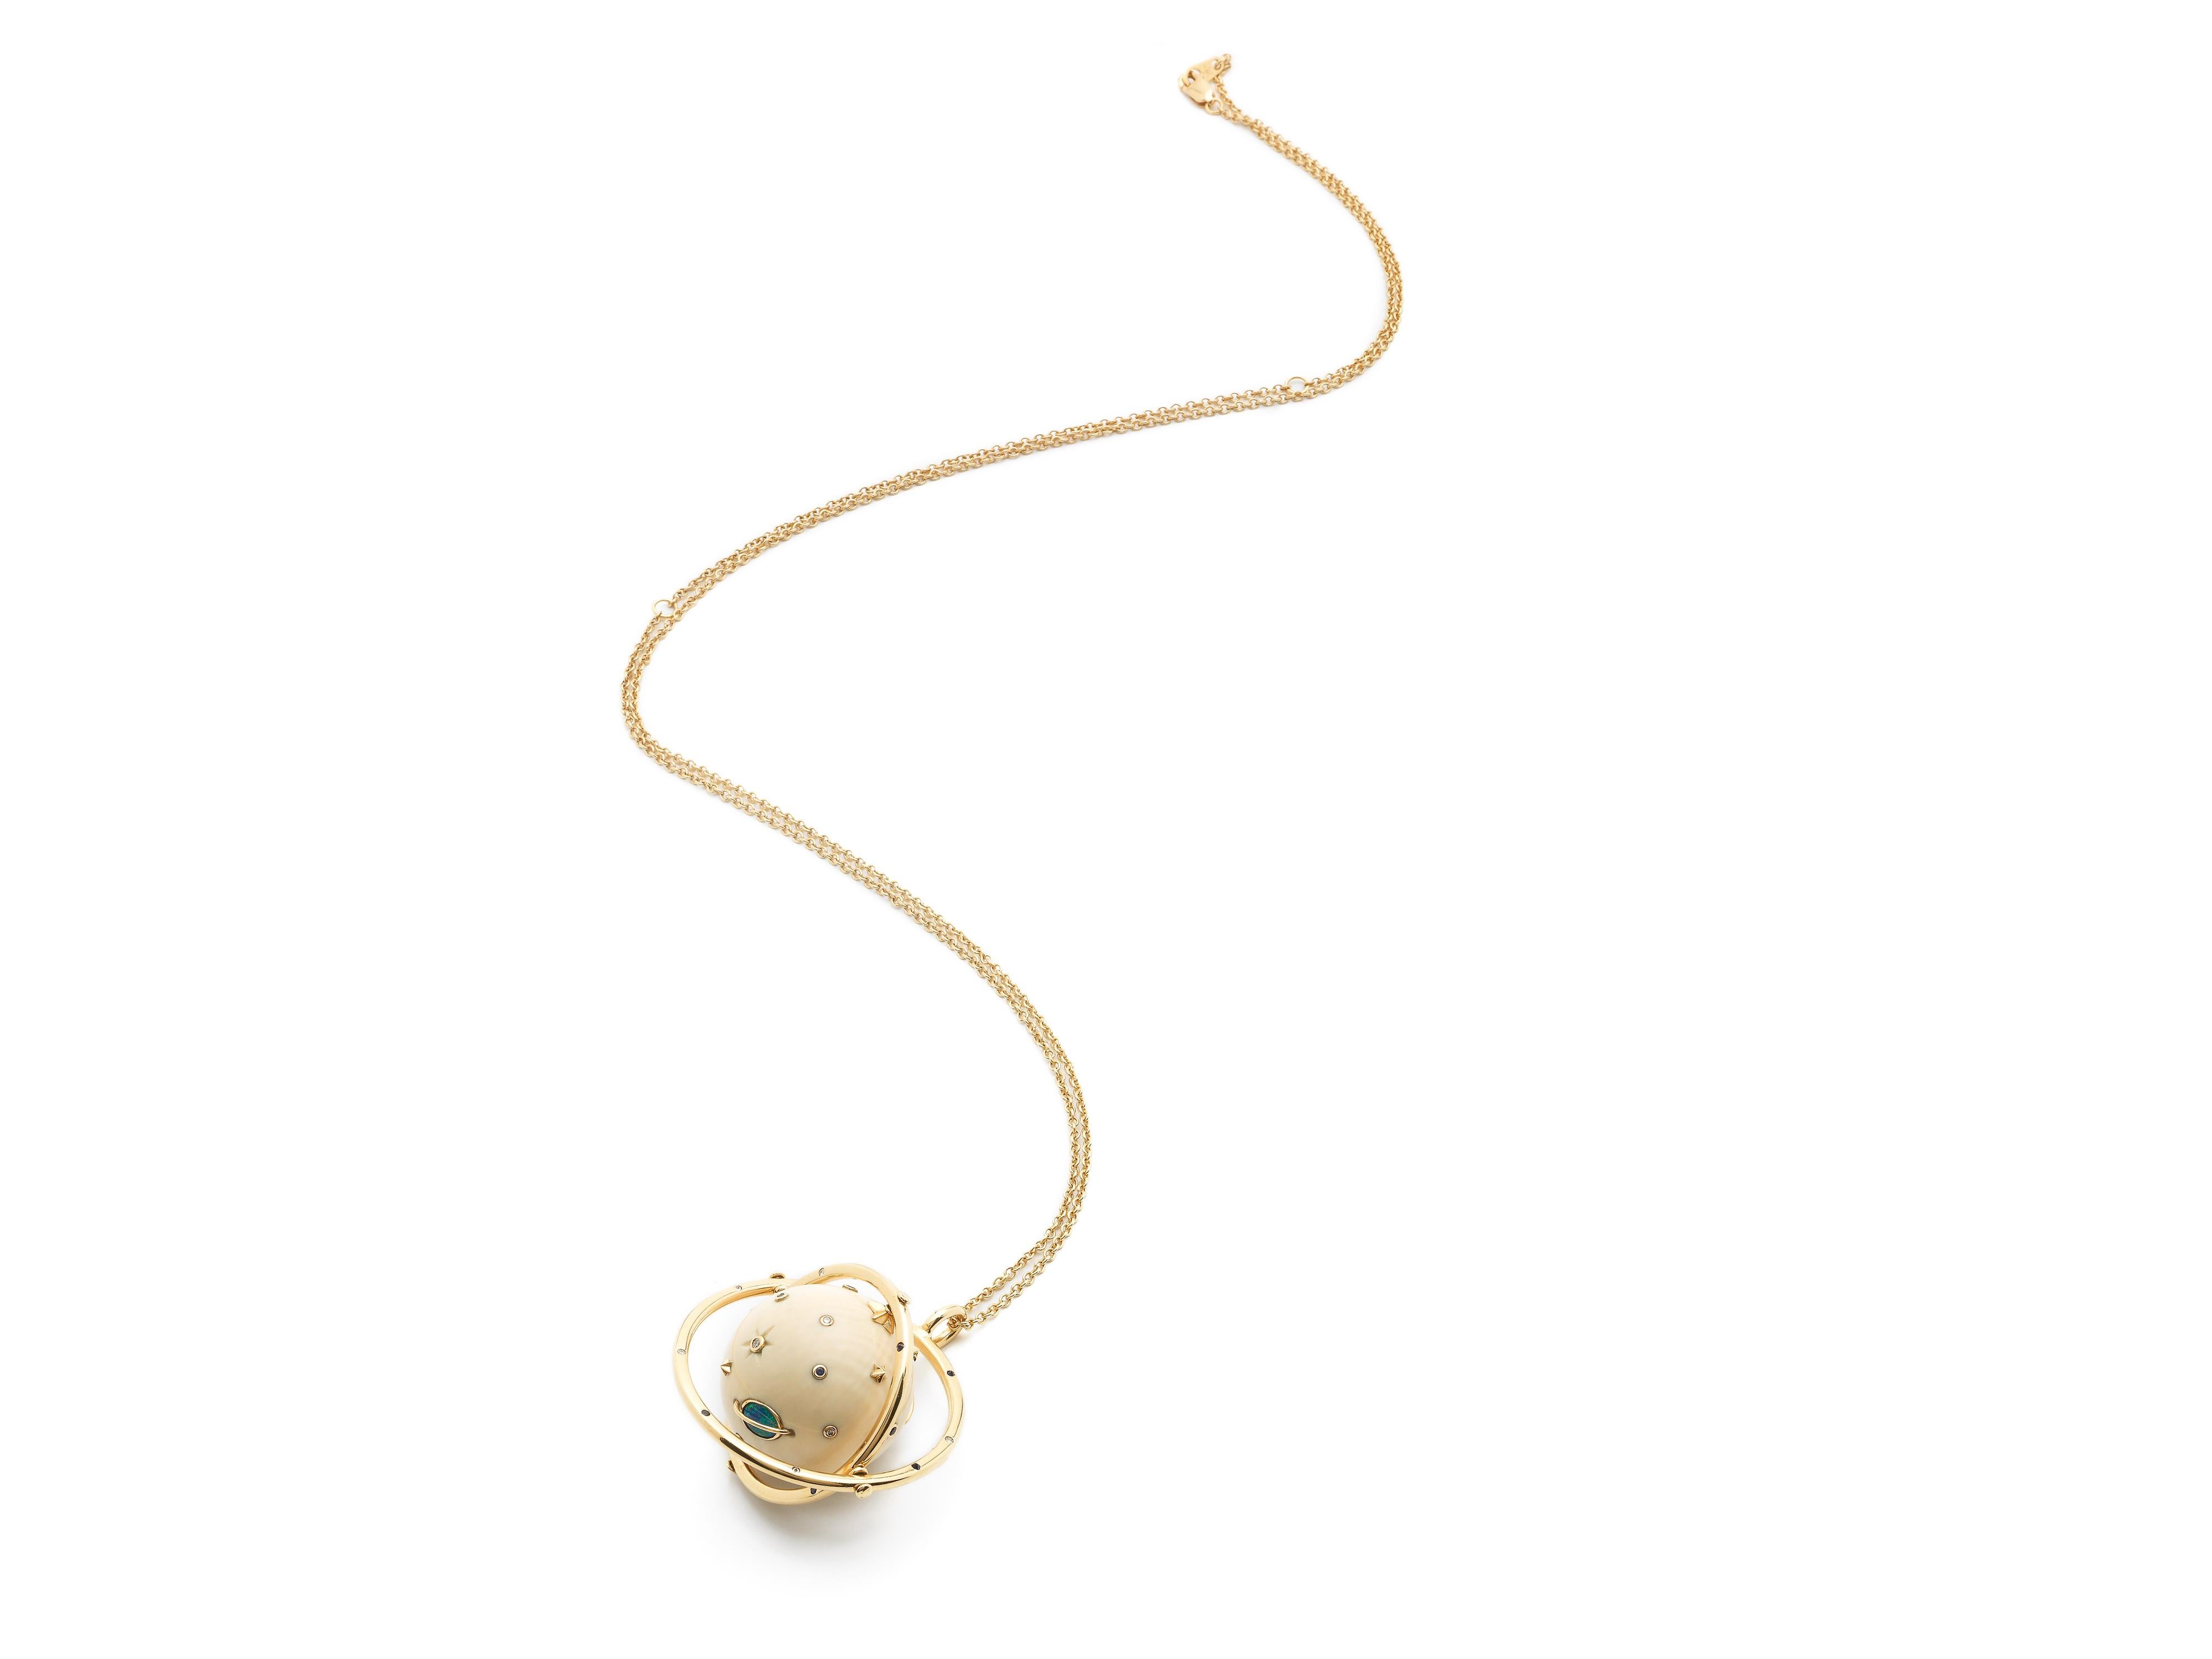 In this striking pendant necklace, the mammoth tusk orb and the two 18k yellow gold rings that surround it all move within one another, making it an endlessly tactile, playful piece. The orb, carved from 60,000-year-old mammoth tusk, is embellished